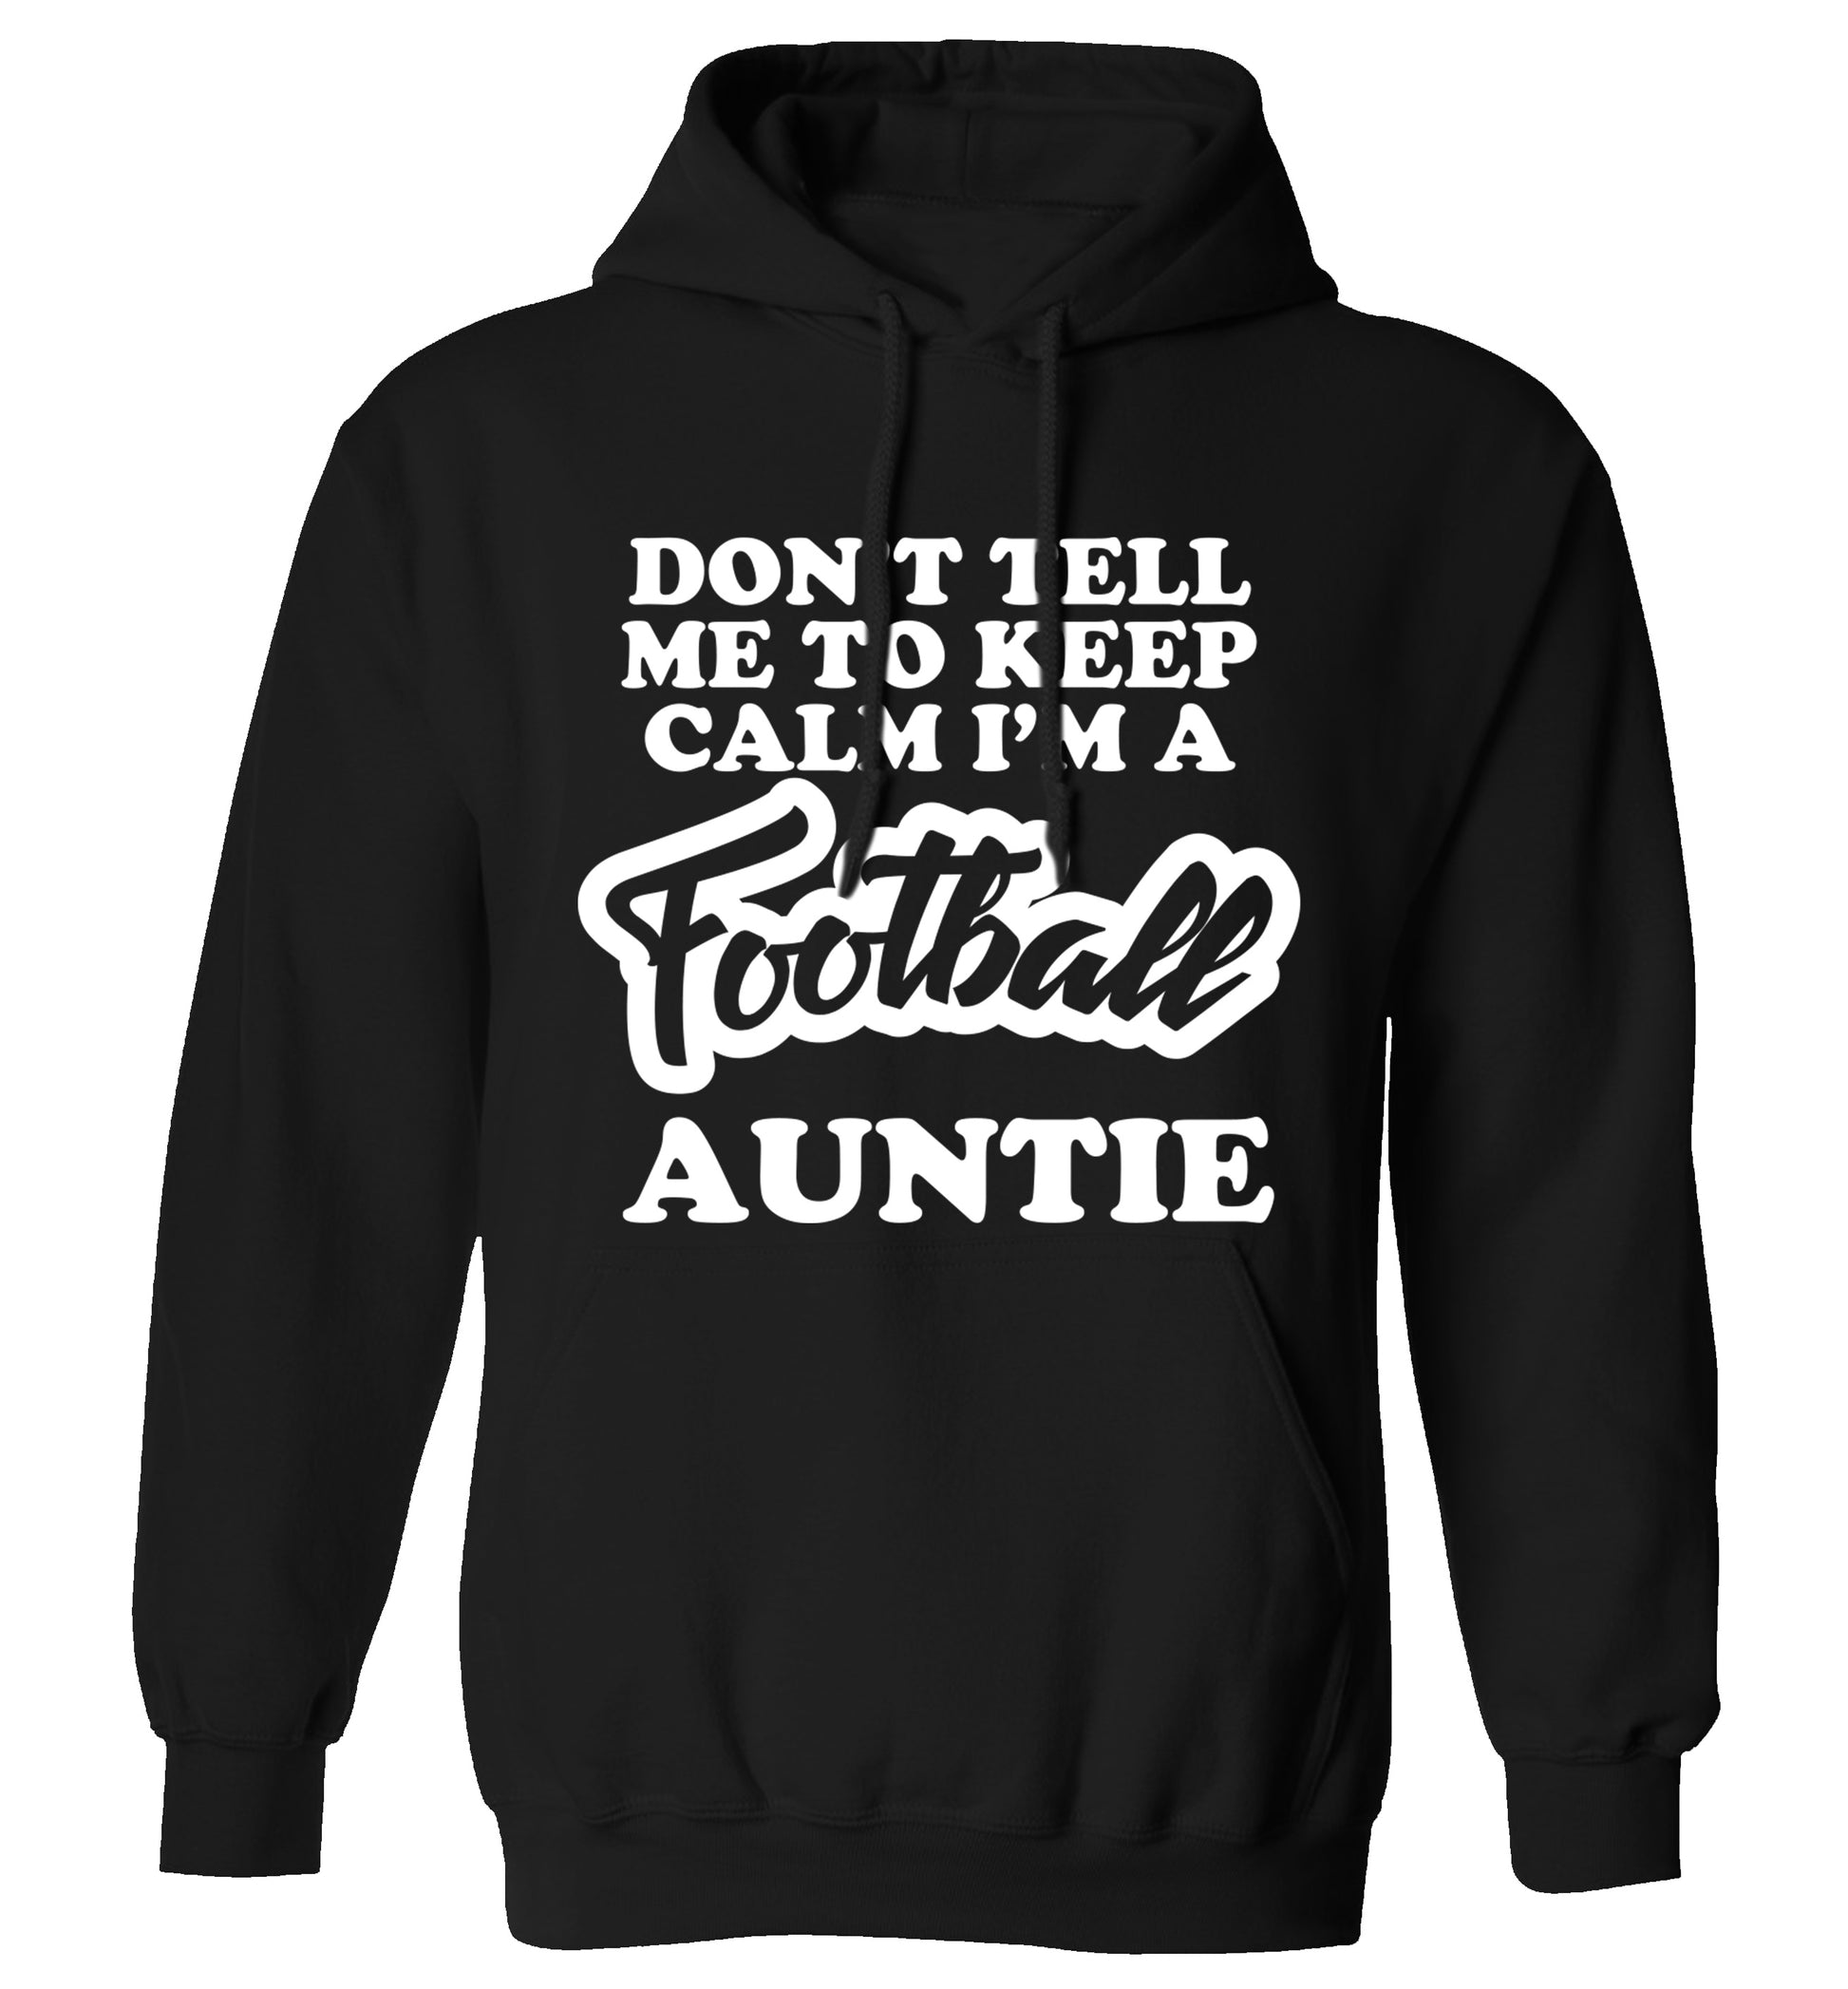 Don't tell me to keep calm I'm a football auntie adults unisexblack hoodie 2XL